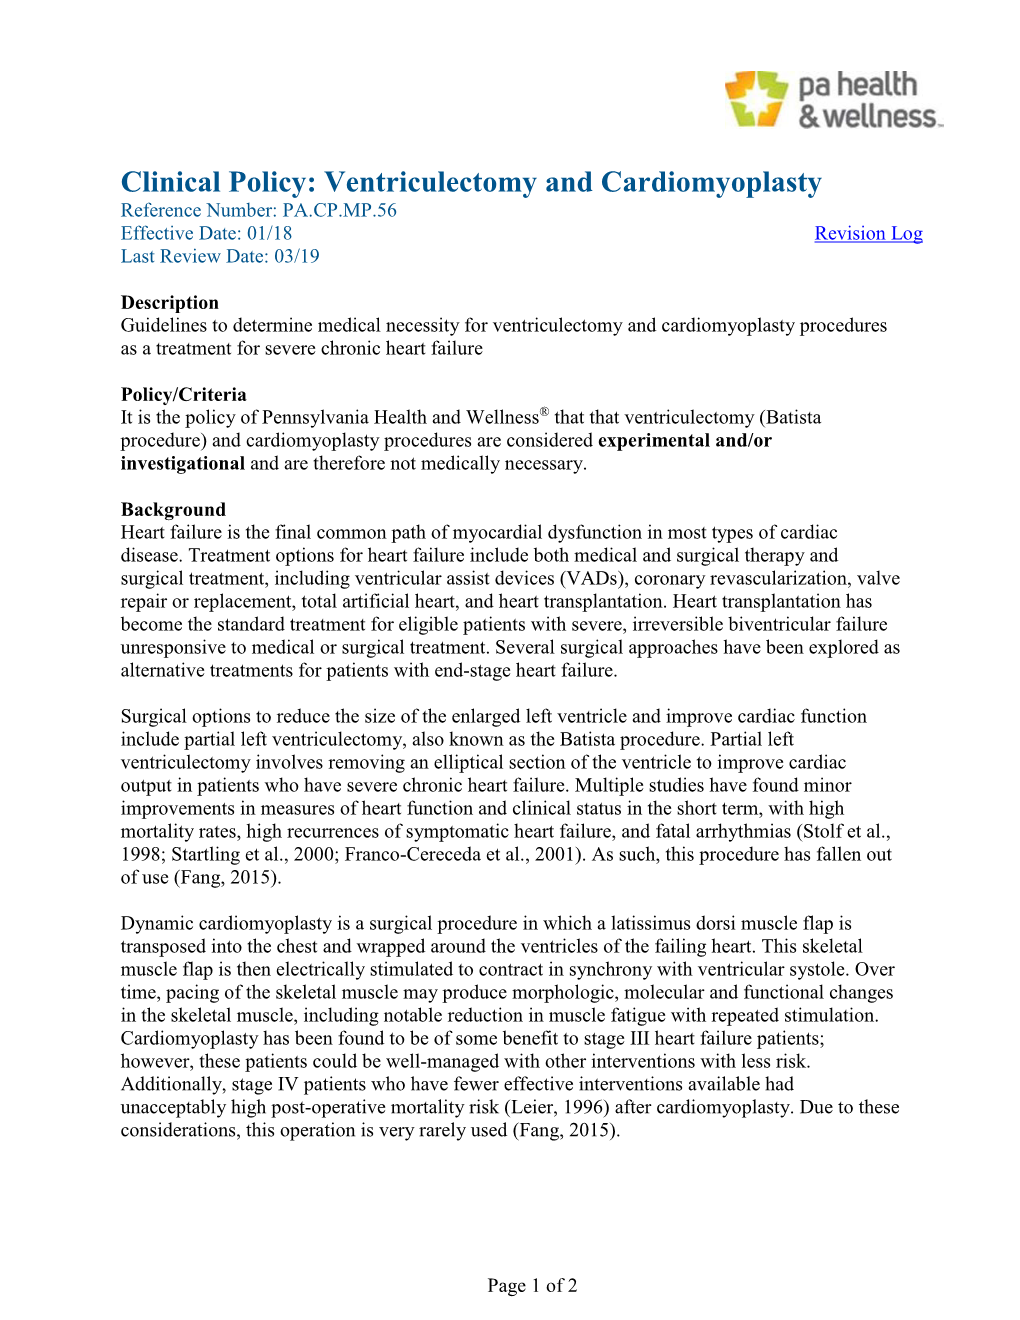 Ventriculectomy and Cardiomyoplasty Reference Number: PA.CP.MP.56 Effective Date: 01/18 Revision Log Last Review Date: 03/19